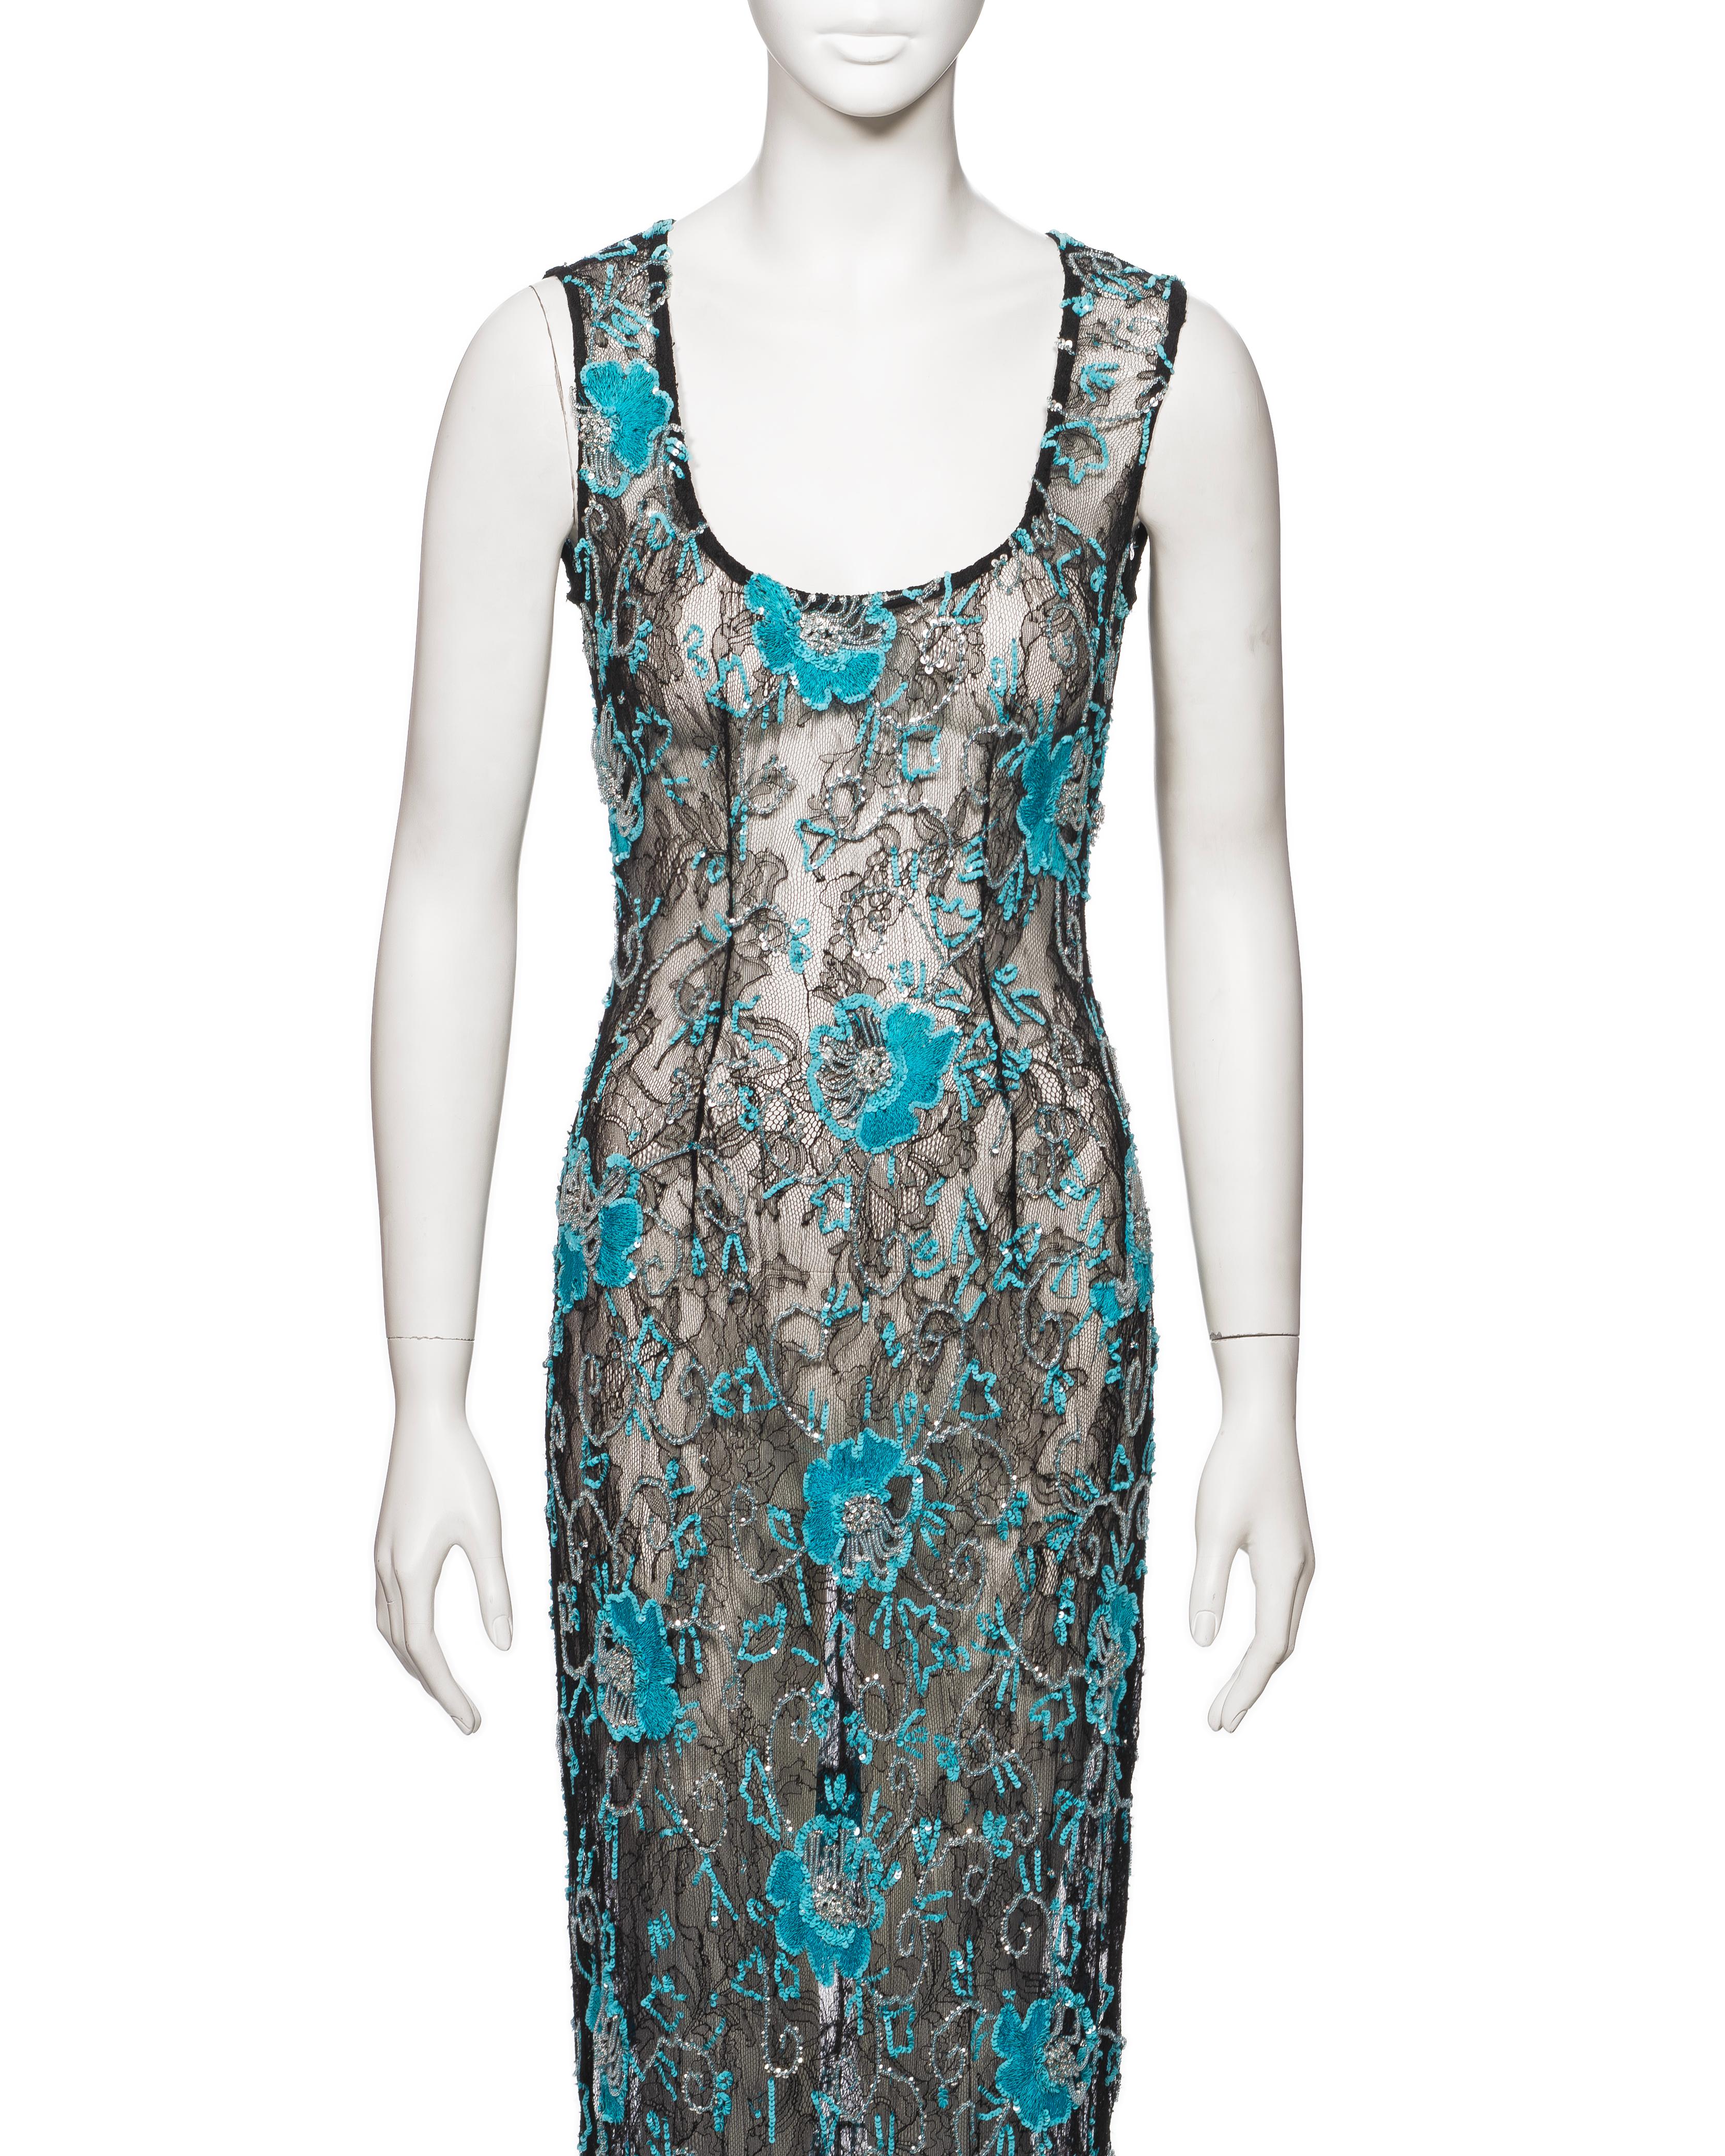 Dolce & Gabbana Blue Floral Embellished Black Lace Evening Dress, FW 1999 In Good Condition For Sale In London, GB